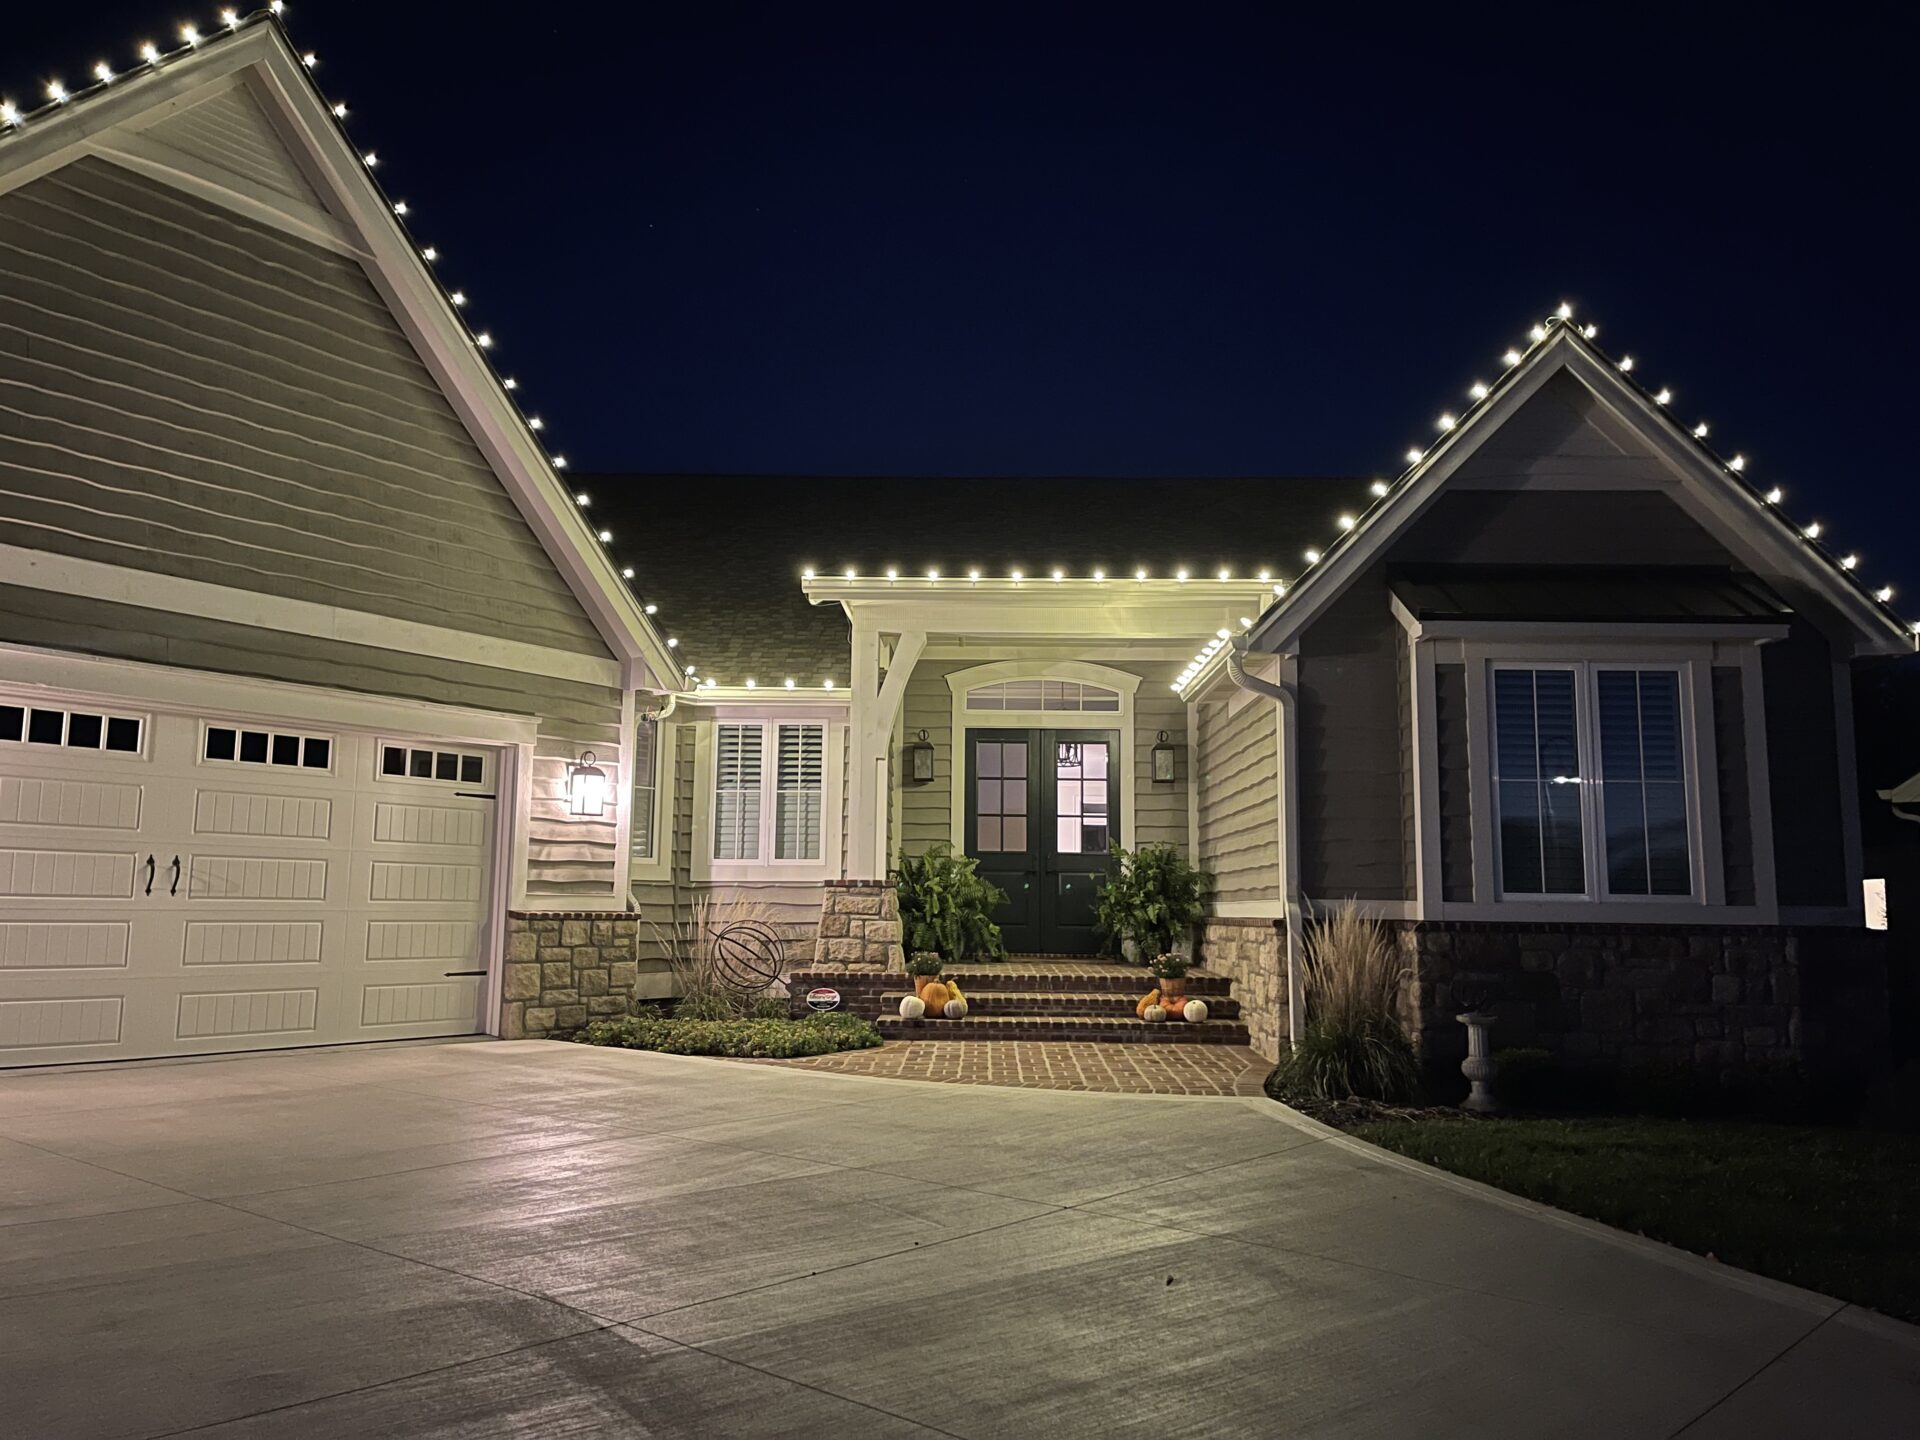 Residential Holiday Lighting Service - Squeegee Squad - Springfield MO